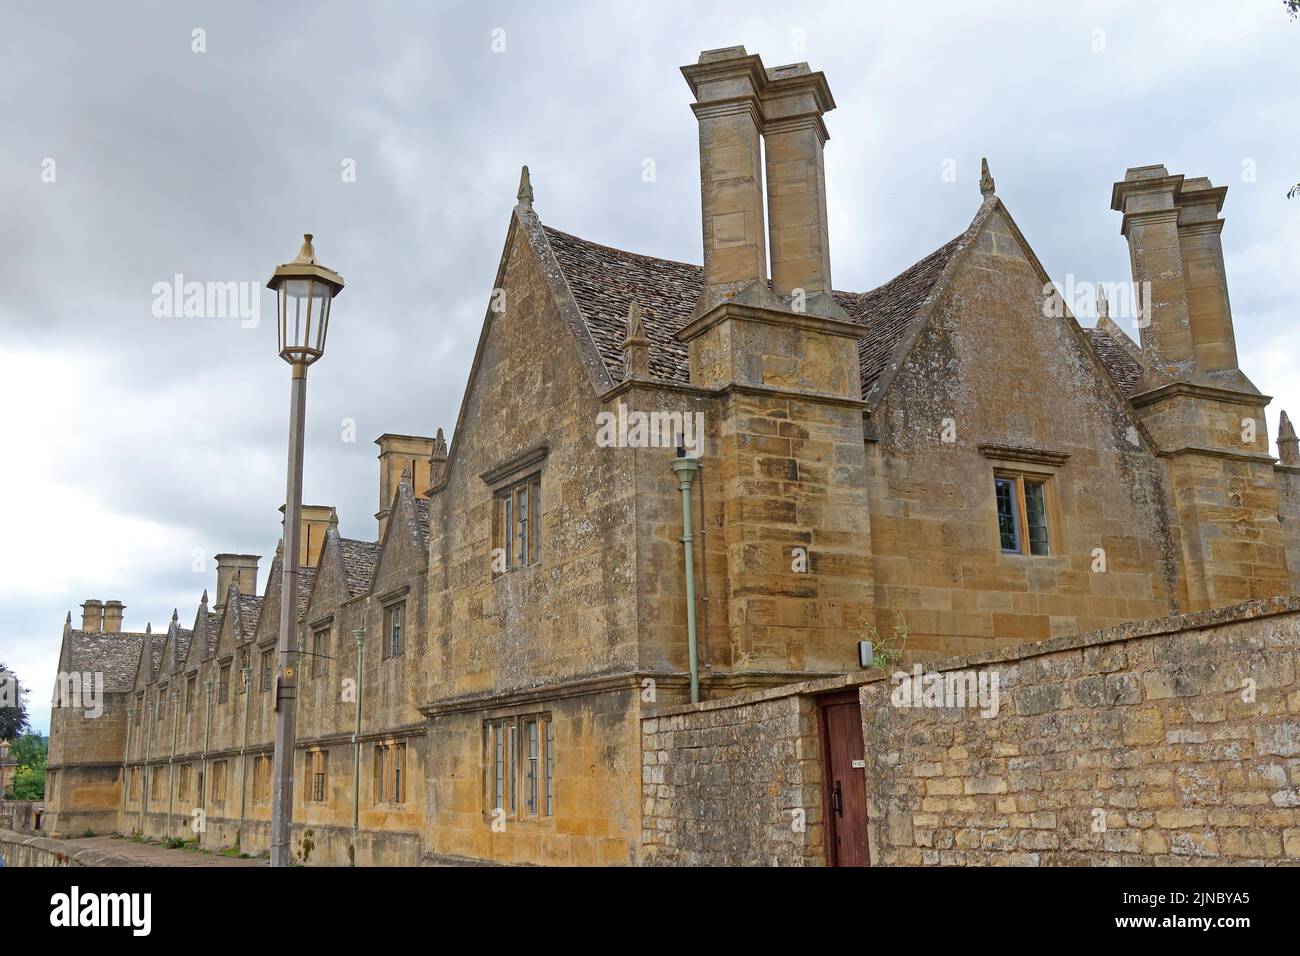 Church Street architecture, Chipping Campden, Cotswolds, Gloucestershire, Angleterre, ROYAUME-UNI, GL55 6AT Banque D'Images